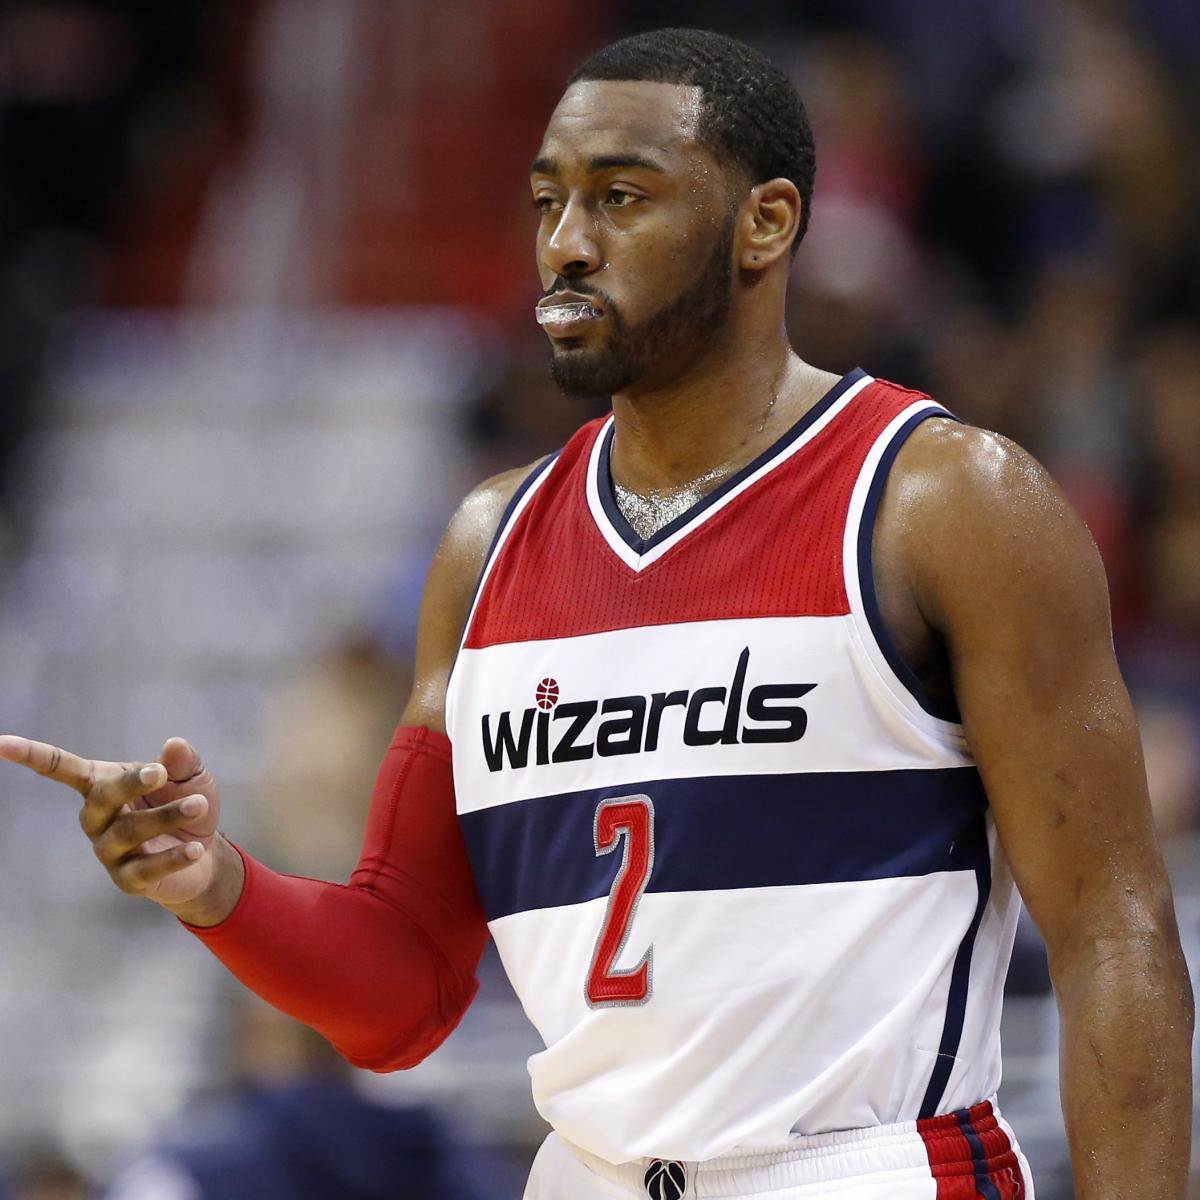 Wizards Signing Jared Butler to Two-Way Contract - Hoops Wire